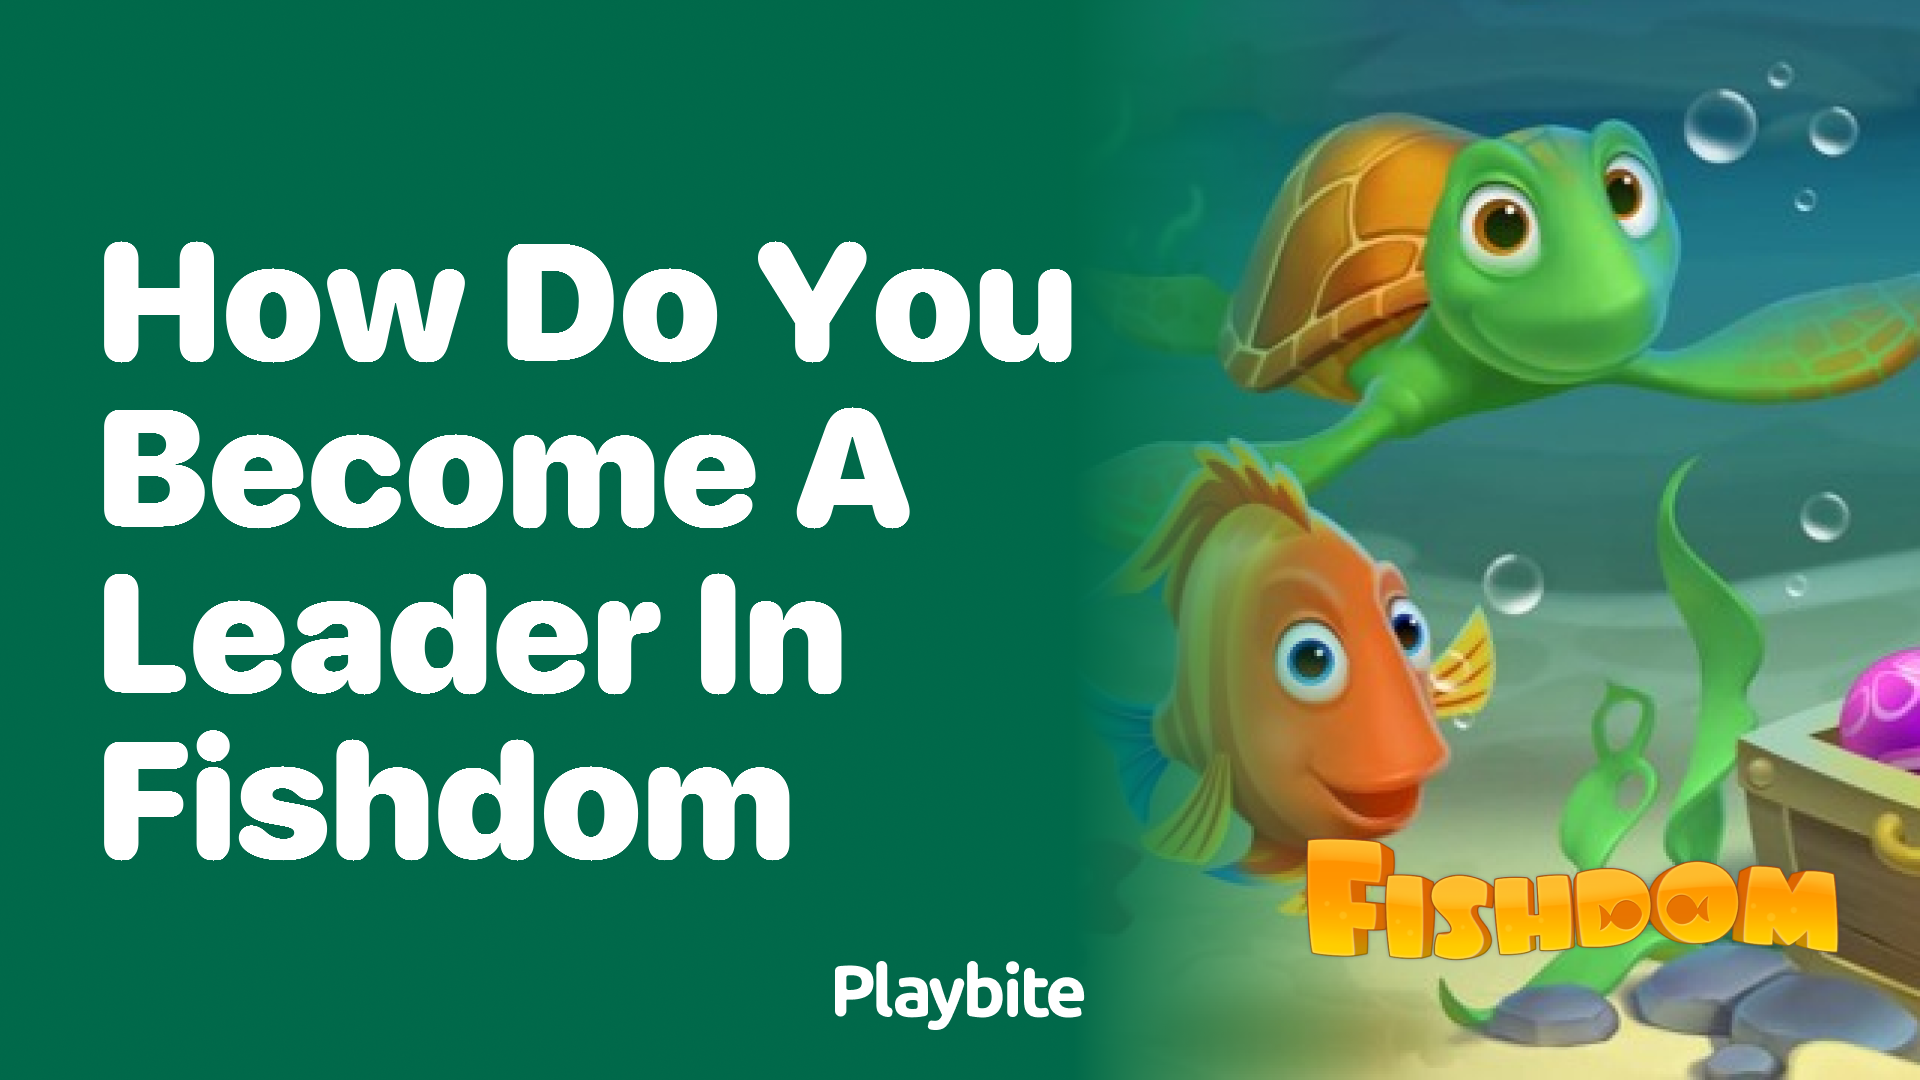 How Do You Become a Leader in Fishdom?